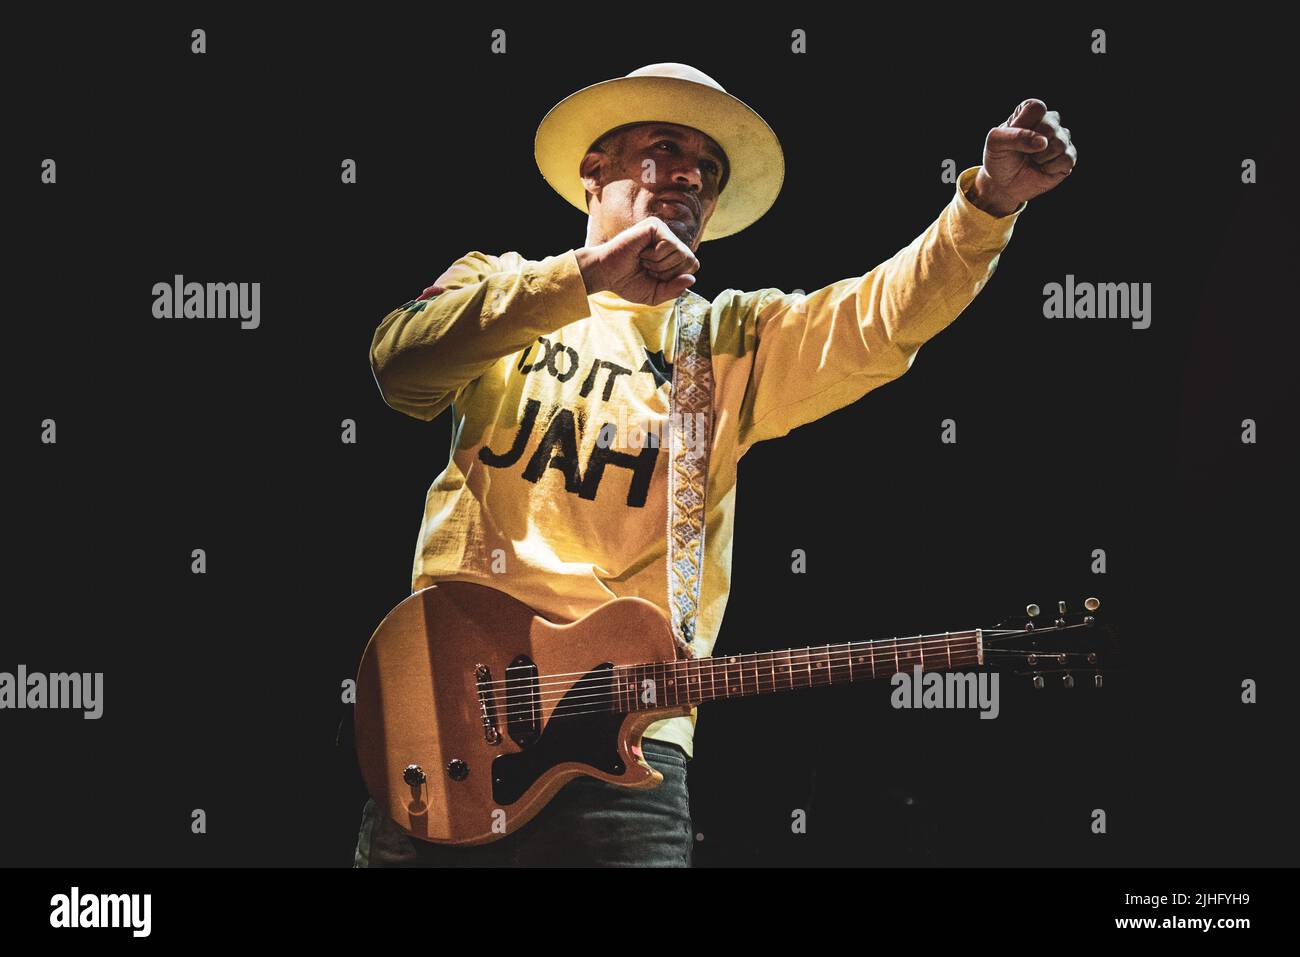 ITALY, GRUGLIASCO, JULY 2ND 2019: Ben Harper, founder, leader guitarist and singer of the American rock band “Ben Harper & The Innocent Criminals”, performing live on stage at the “Gruvillage Festival” 2019 edition Stock Photo